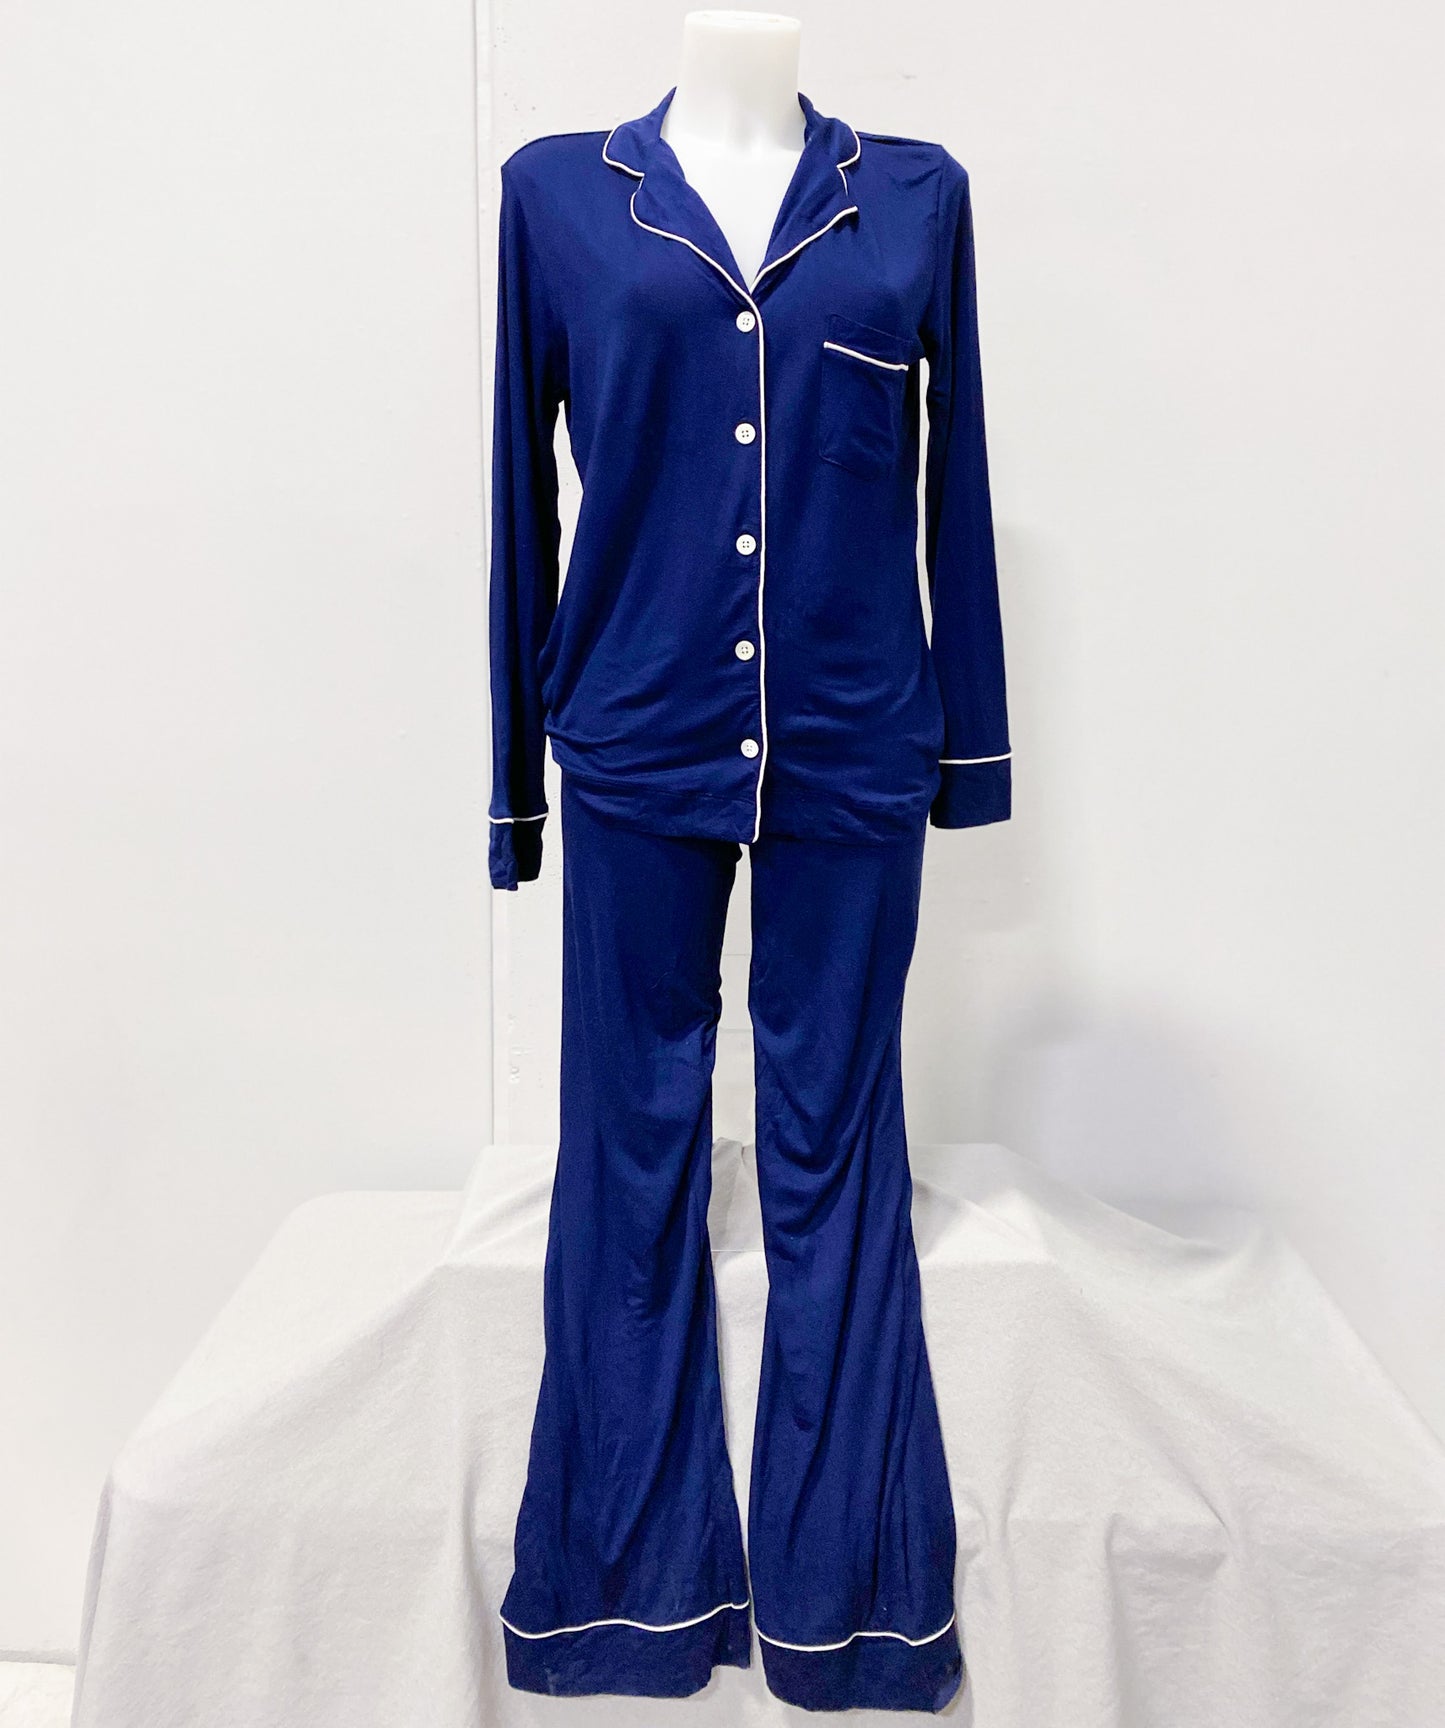 Women's Navy Piped Pajama Set (Size Small)